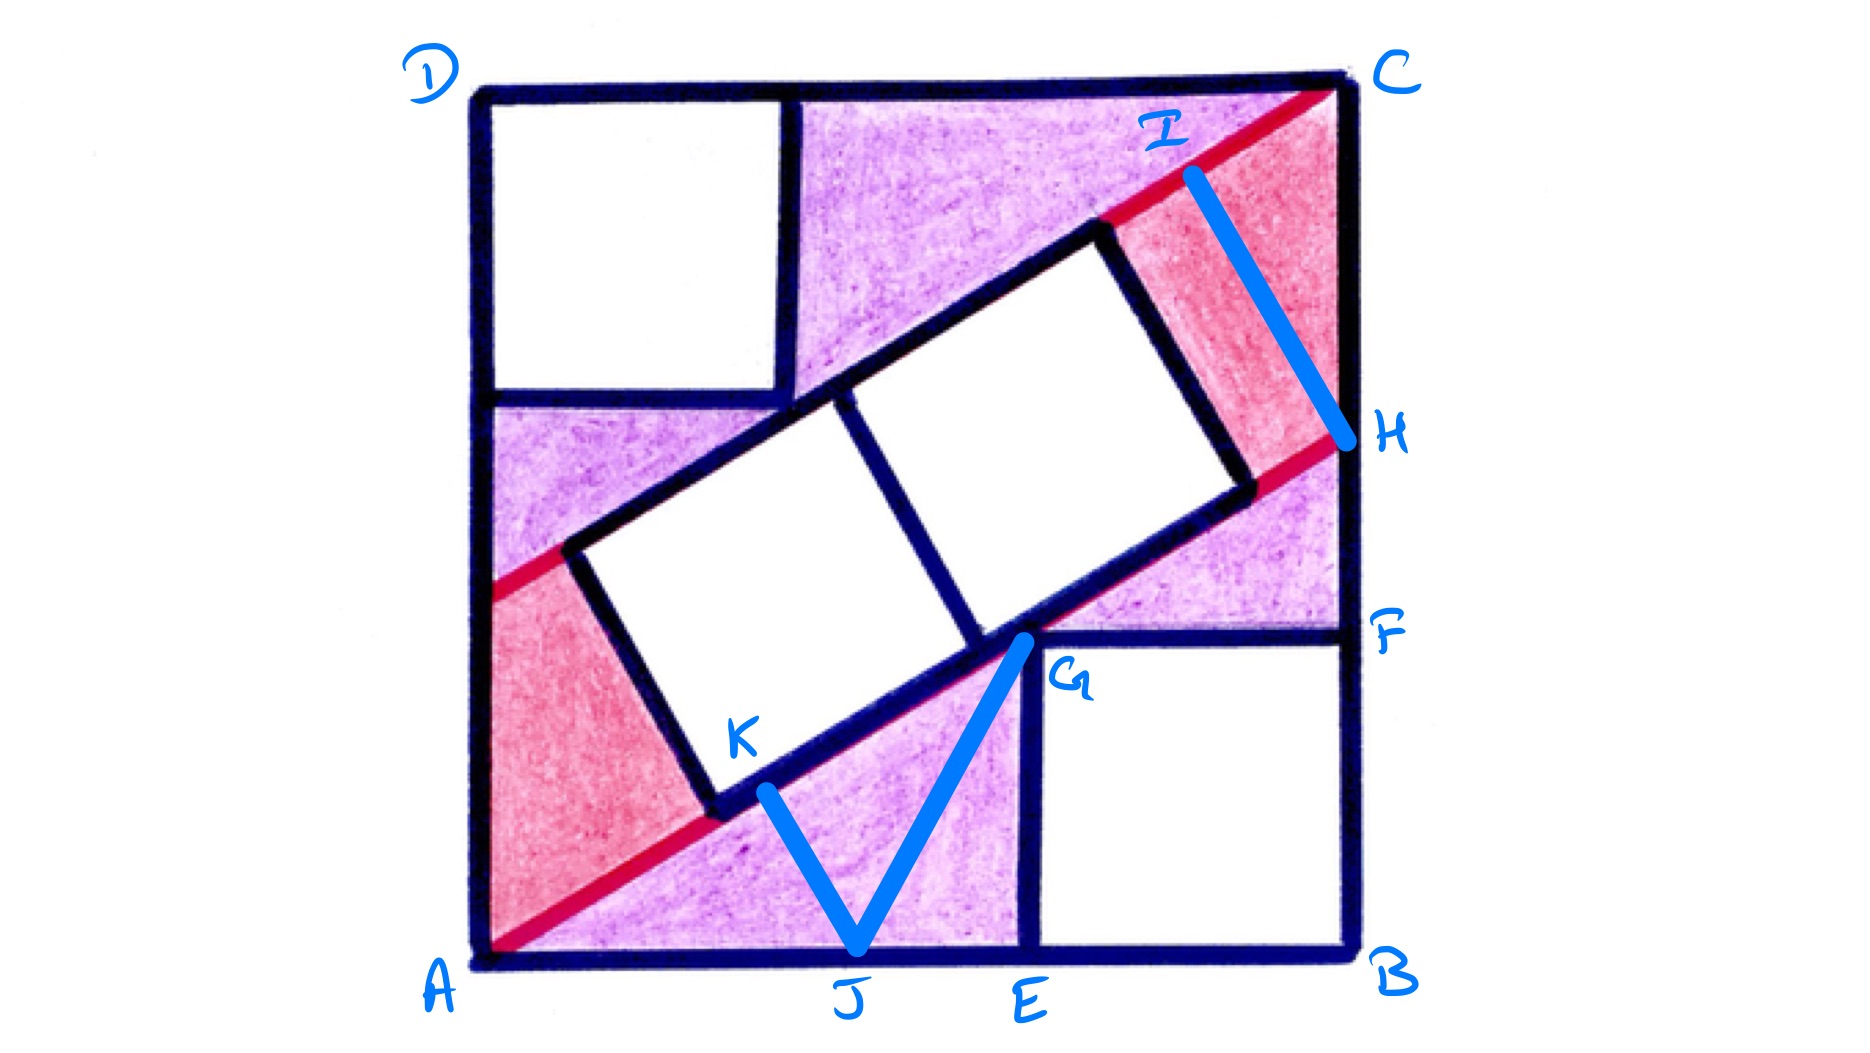 Four congruent squares in a square labelled 